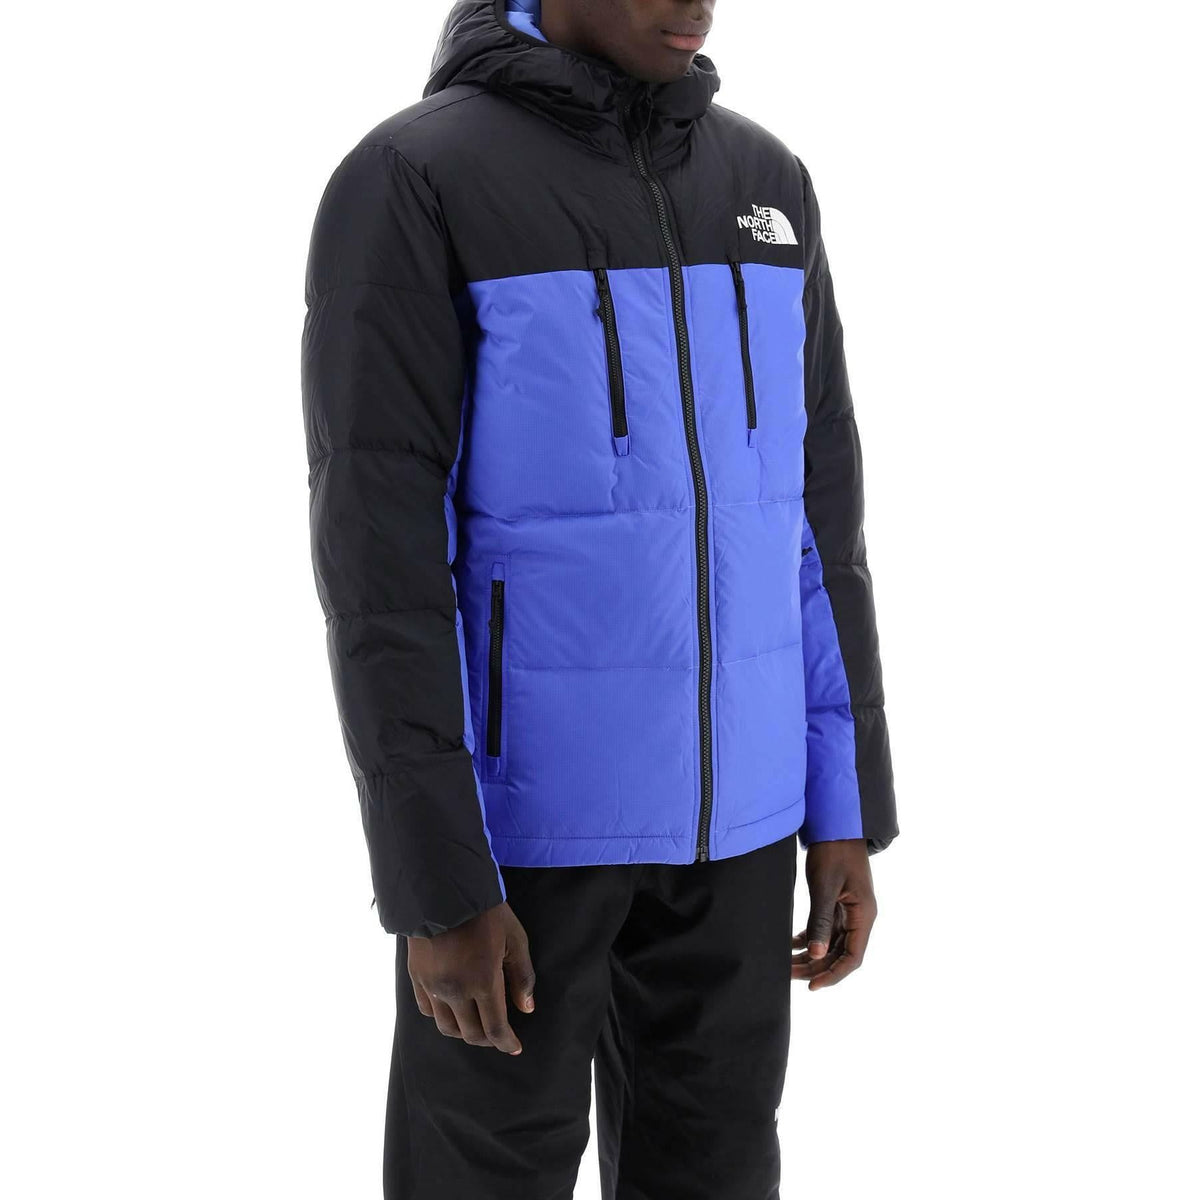 THE NORTH FACE - The North Face Solar Blue Recycled Nylon Himalayan Short Hooded Down Jacket - JOHN JULIA